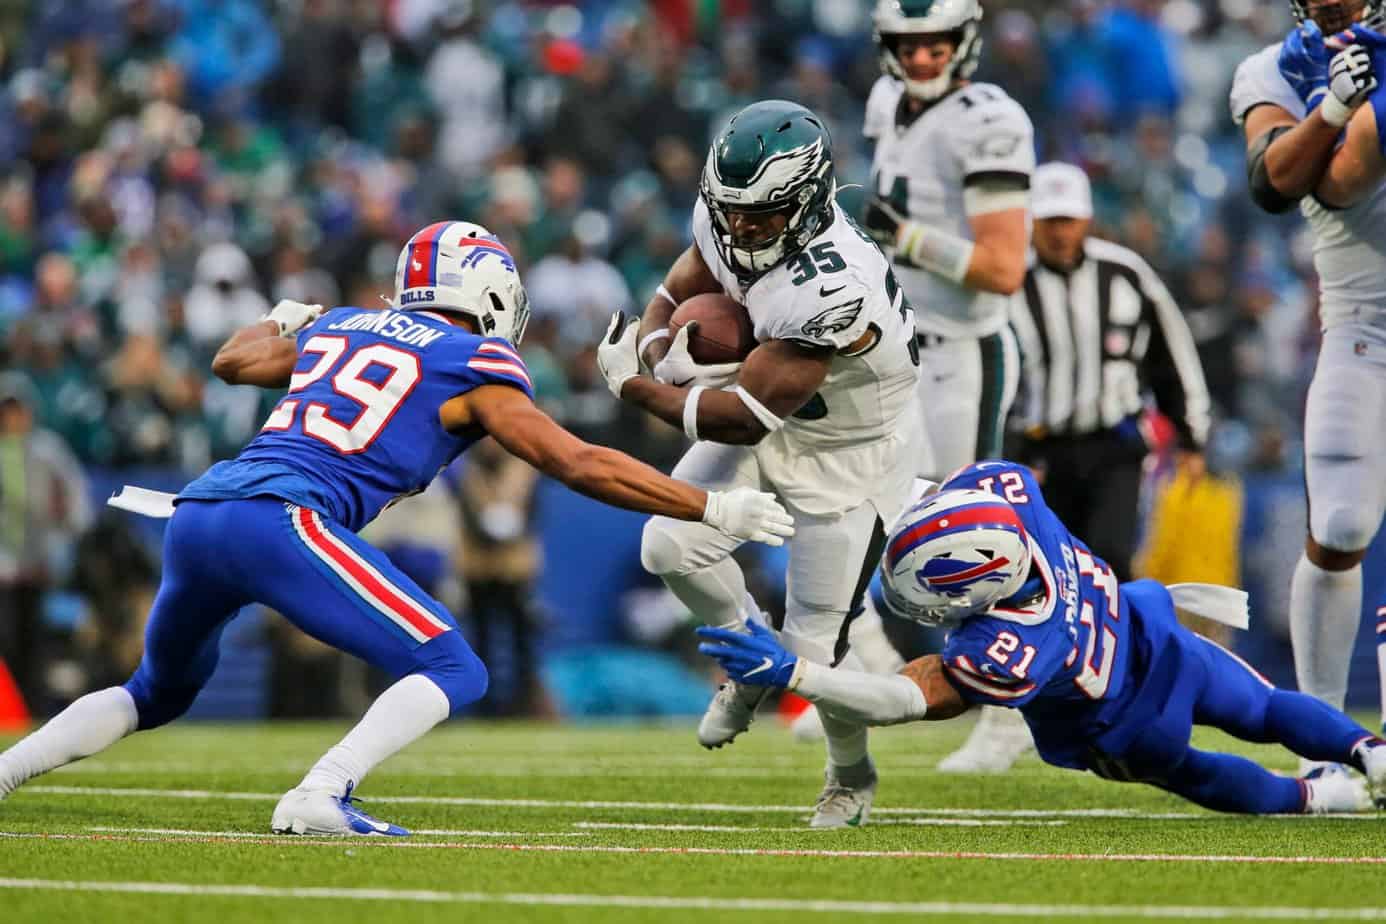 Eagles vs. Bills Preview and Free Pick